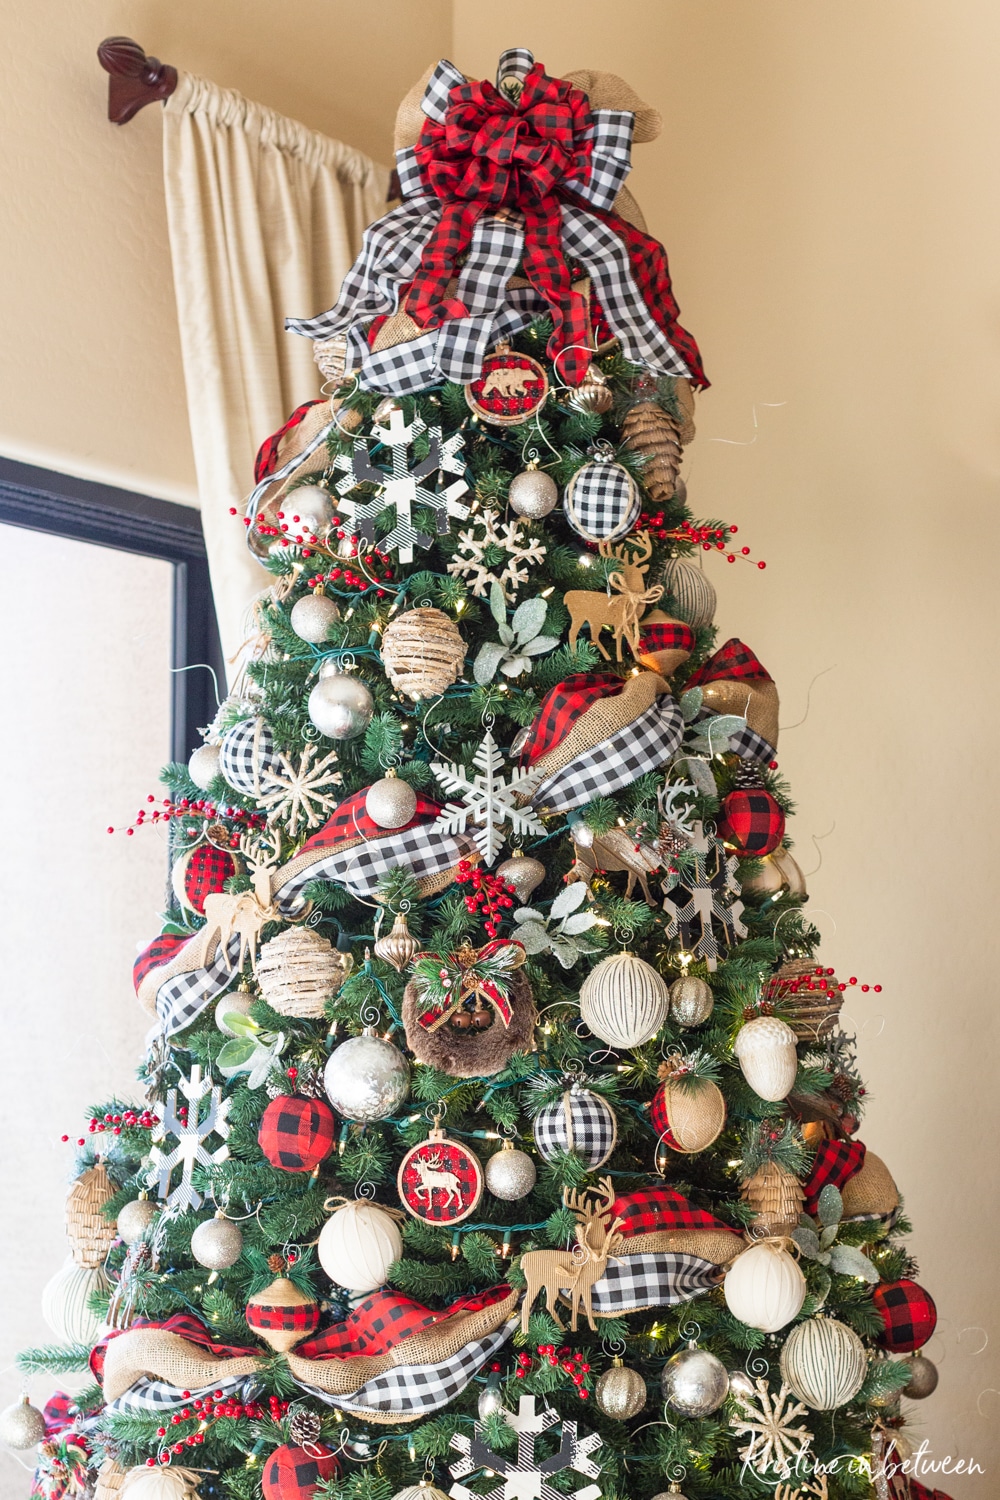 A Christmas tree decorated in buffalo check.